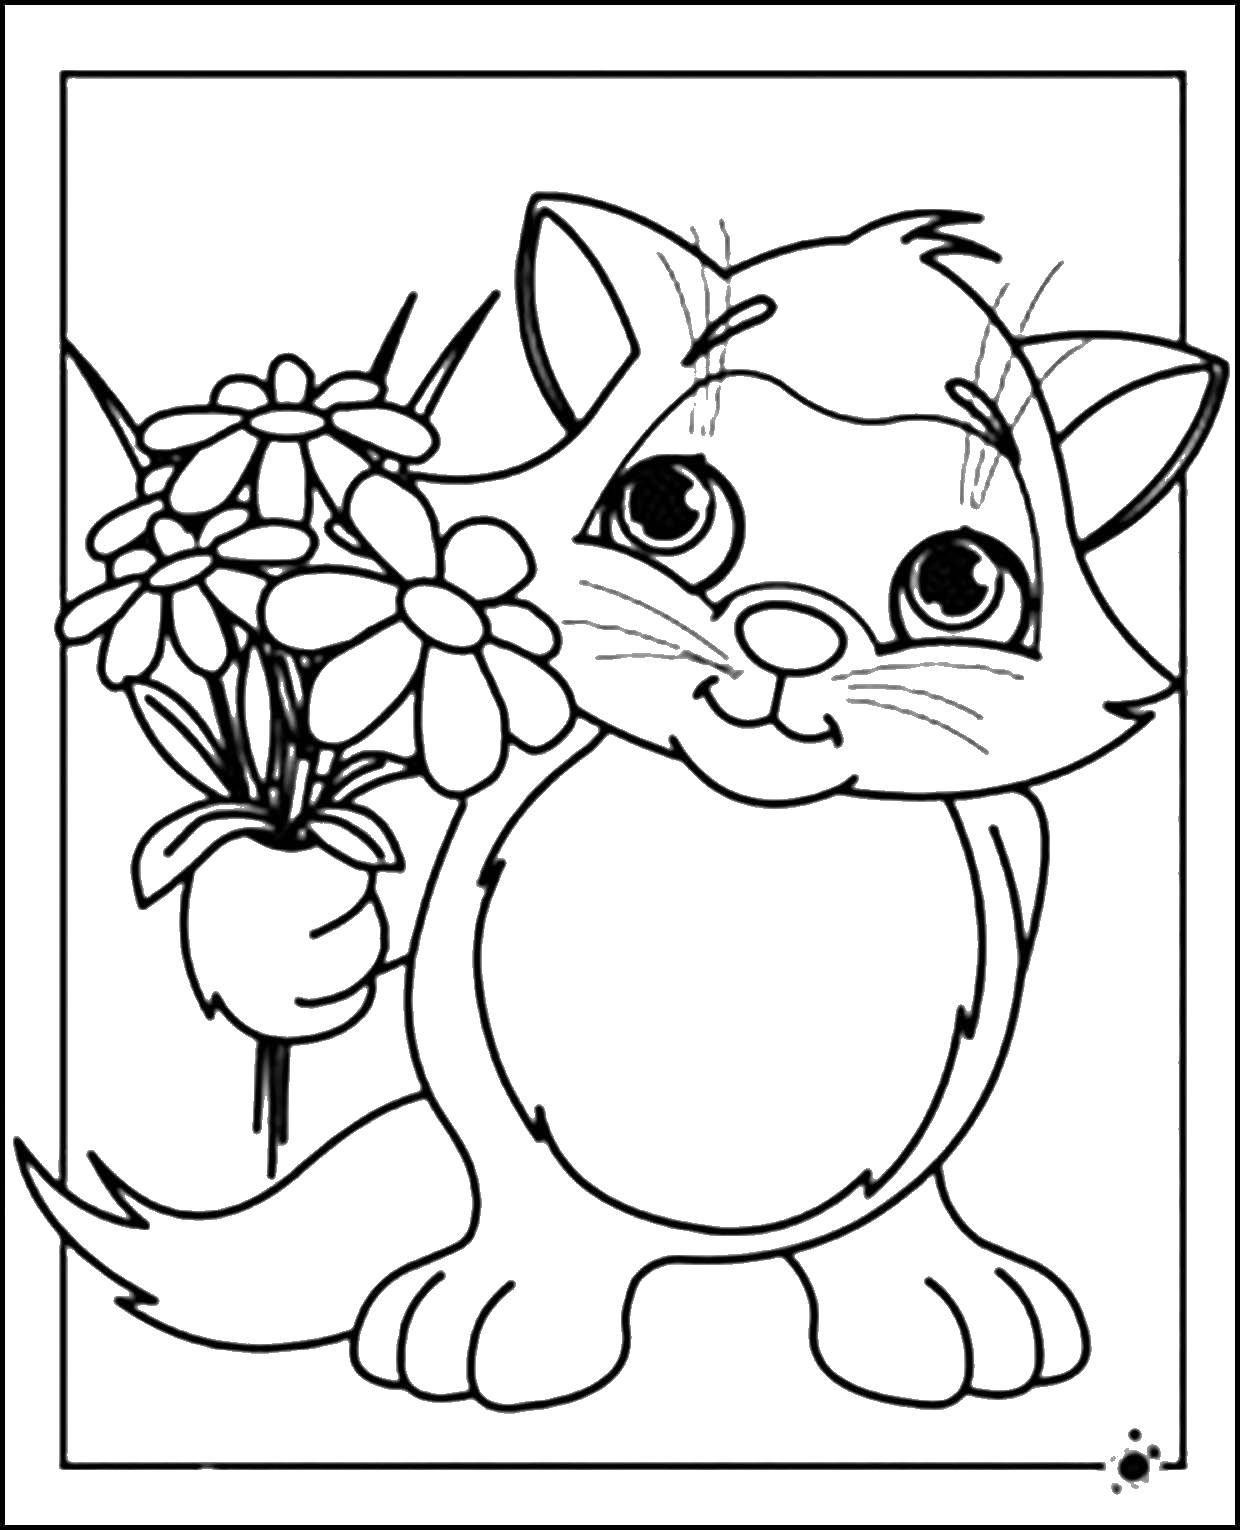 Coloring Kitten with flowers. Category little ones. Tags:  Animals, kitten.